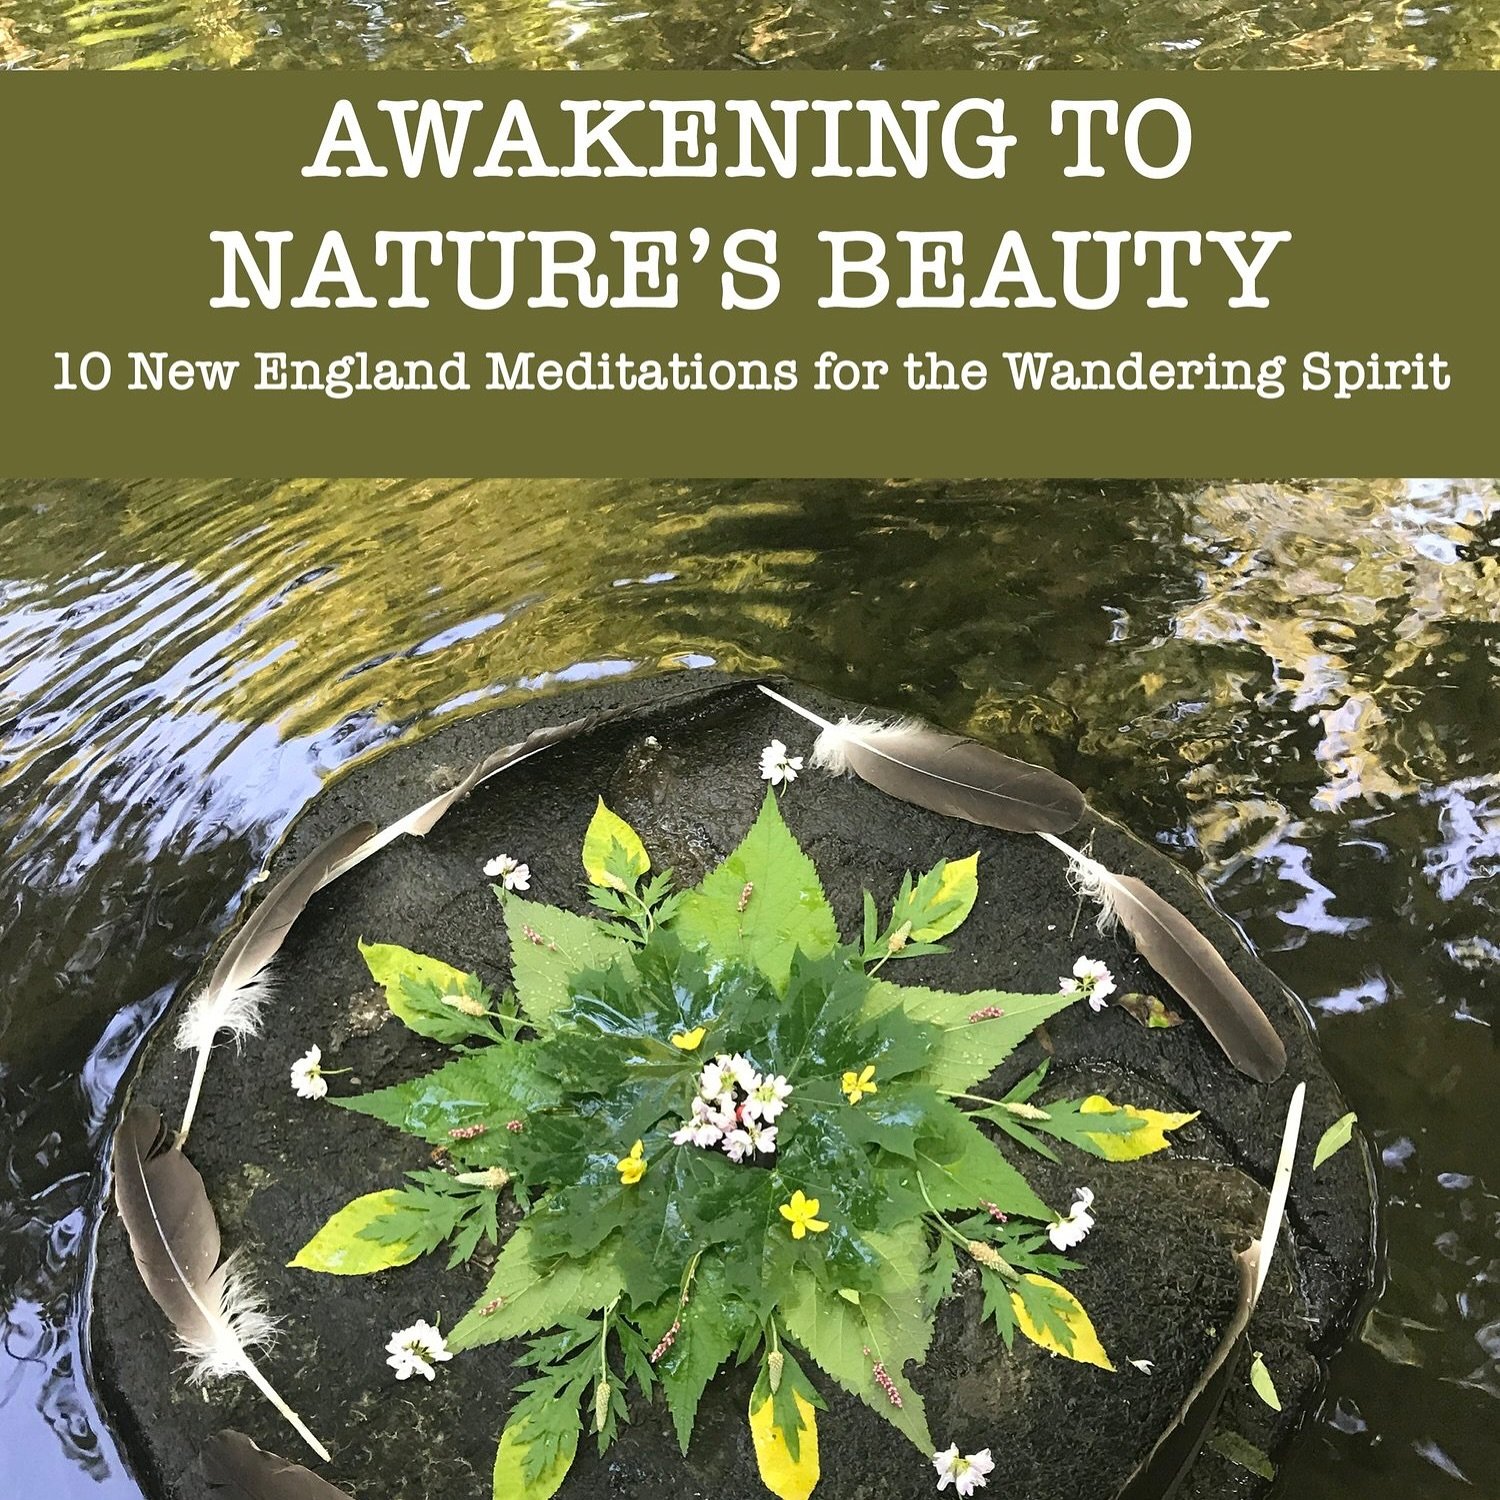 Happy Earth Day and third publishing anniversary to Awakening to Nature&rsquo;s Beauty! 🥳 This book of short stories, including original art from Moriah Mylod-Daggett @birdseyeintheattic has opened up many conversations with readers about the import